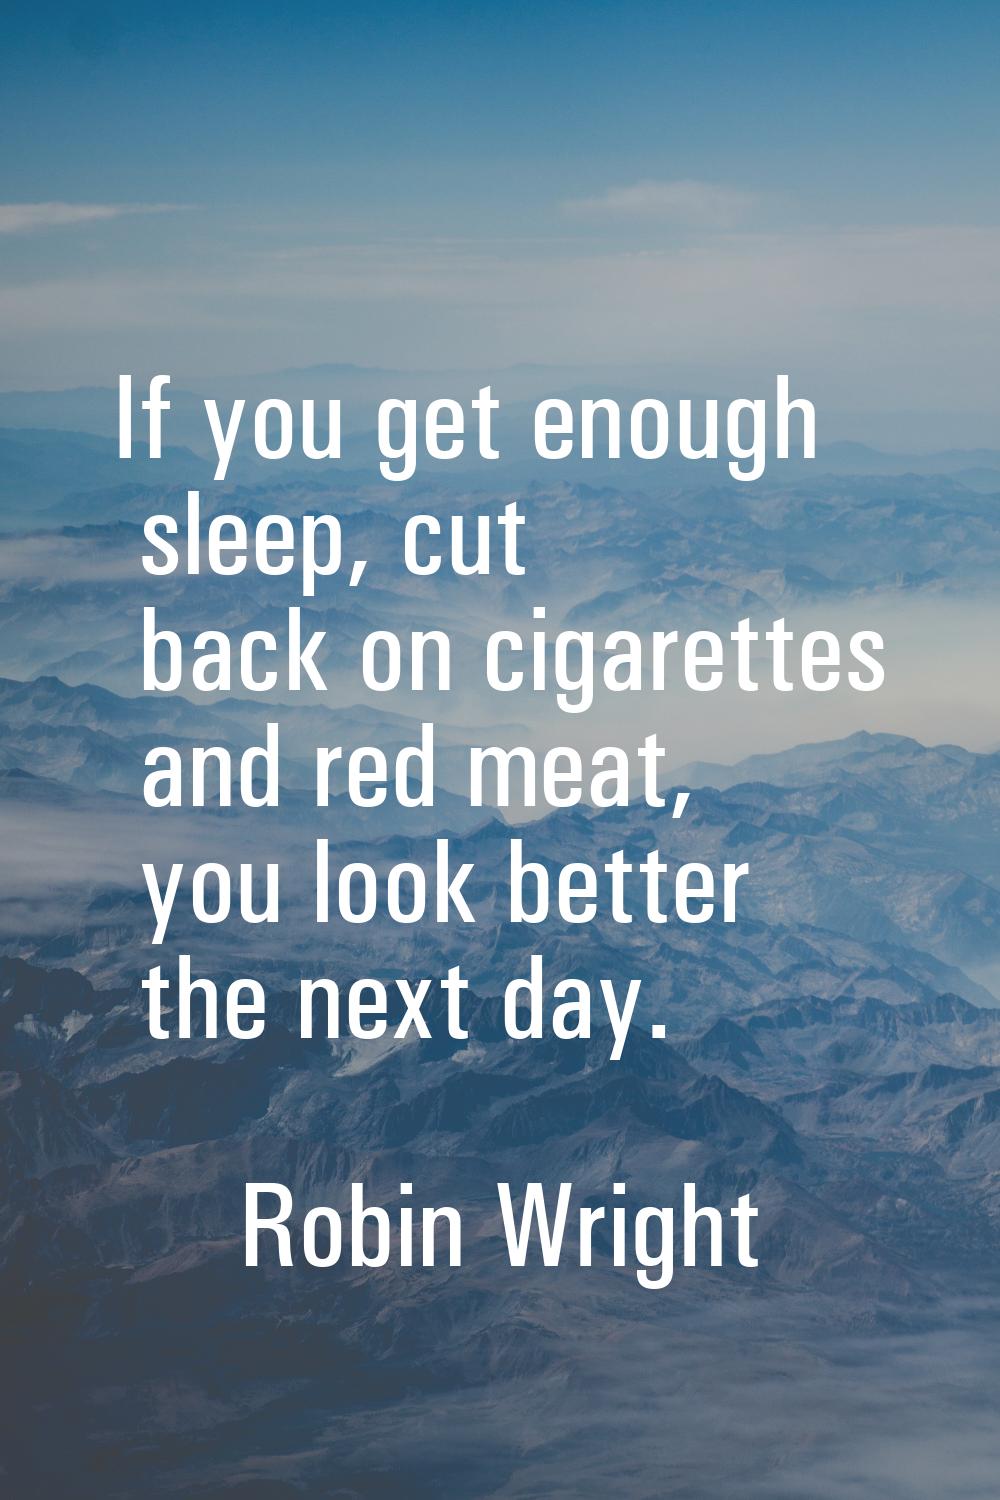 If you get enough sleep, cut back on cigarettes and red meat, you look better the next day.